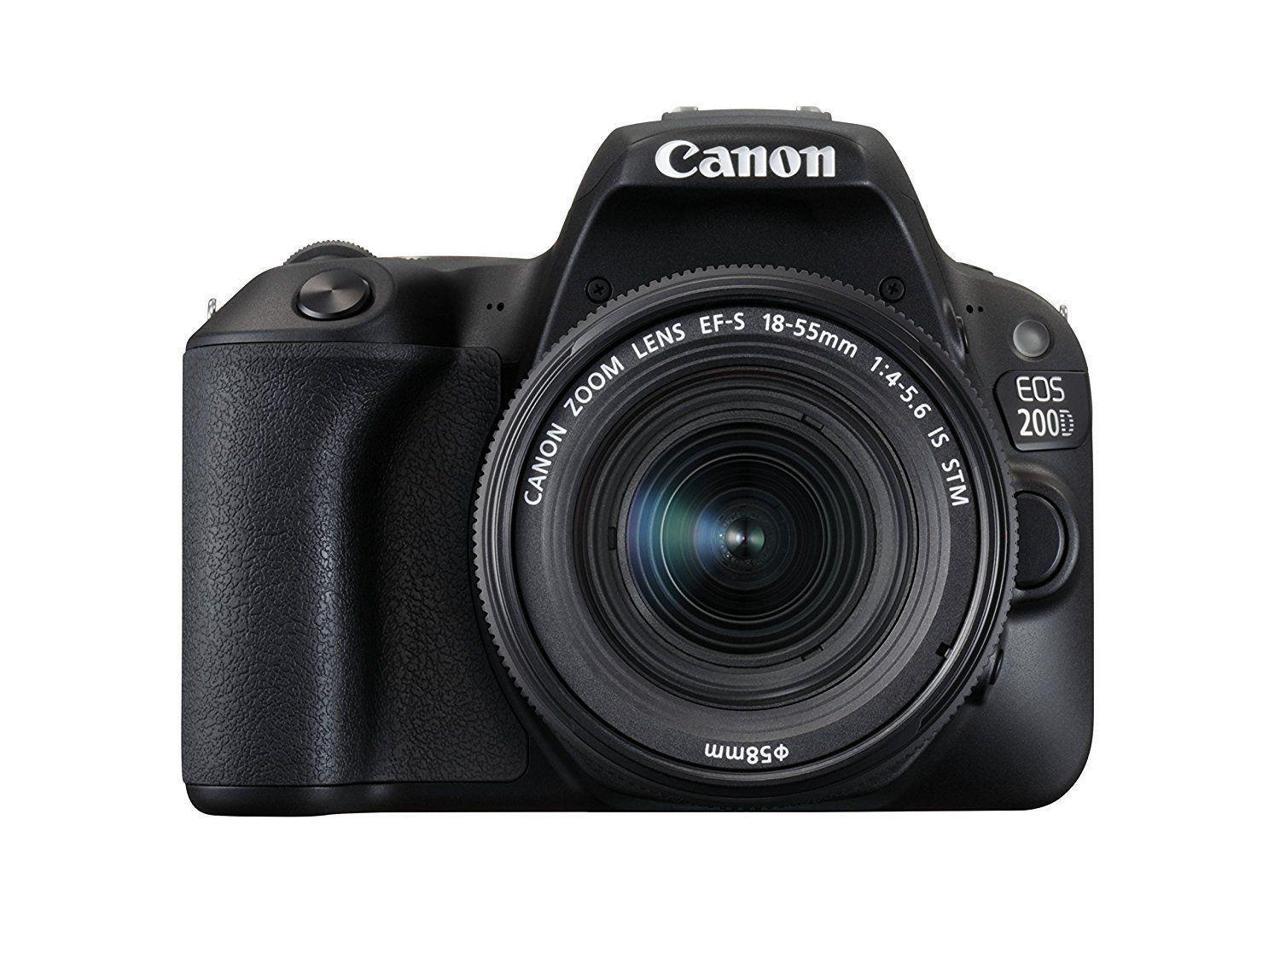 Canon EOS Rebel 200D / SL2 DSLR Camera with 18-55mm f/3.5-5.6 III Lens